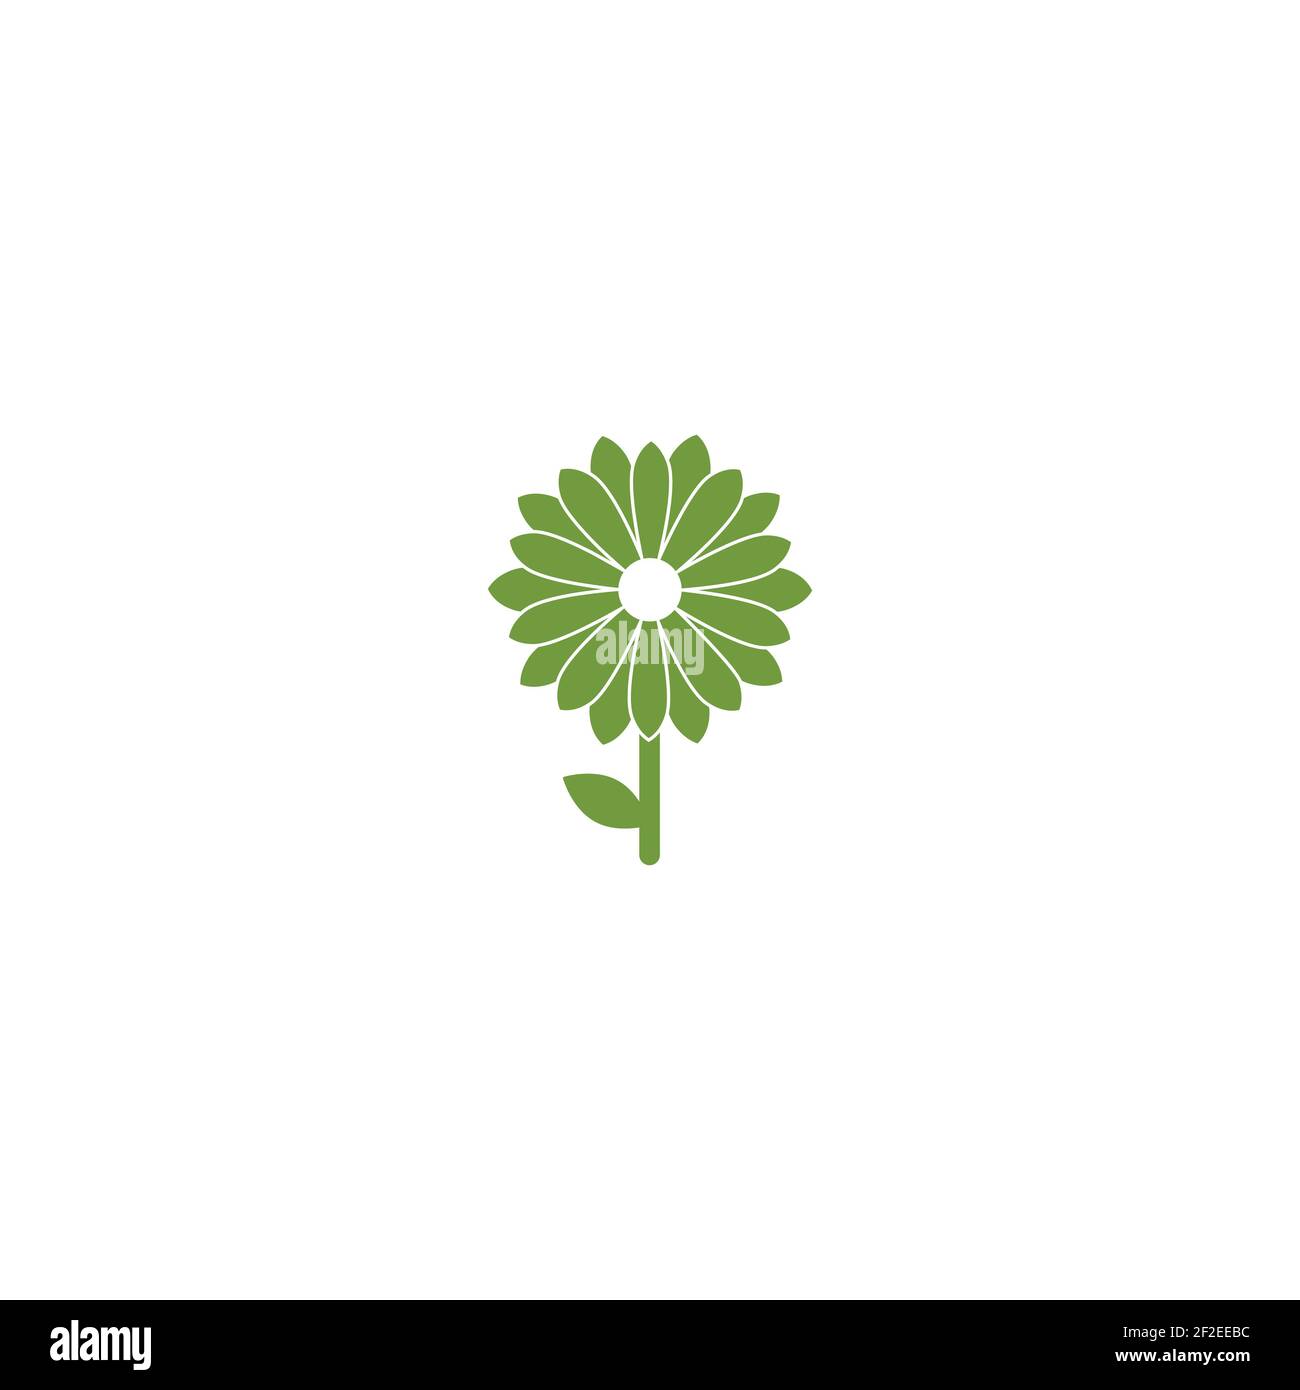 Green flat icon of chrysanthemum flower in with stem and leaf. Big Bloom with big sharp petals and white core. Stock Vector